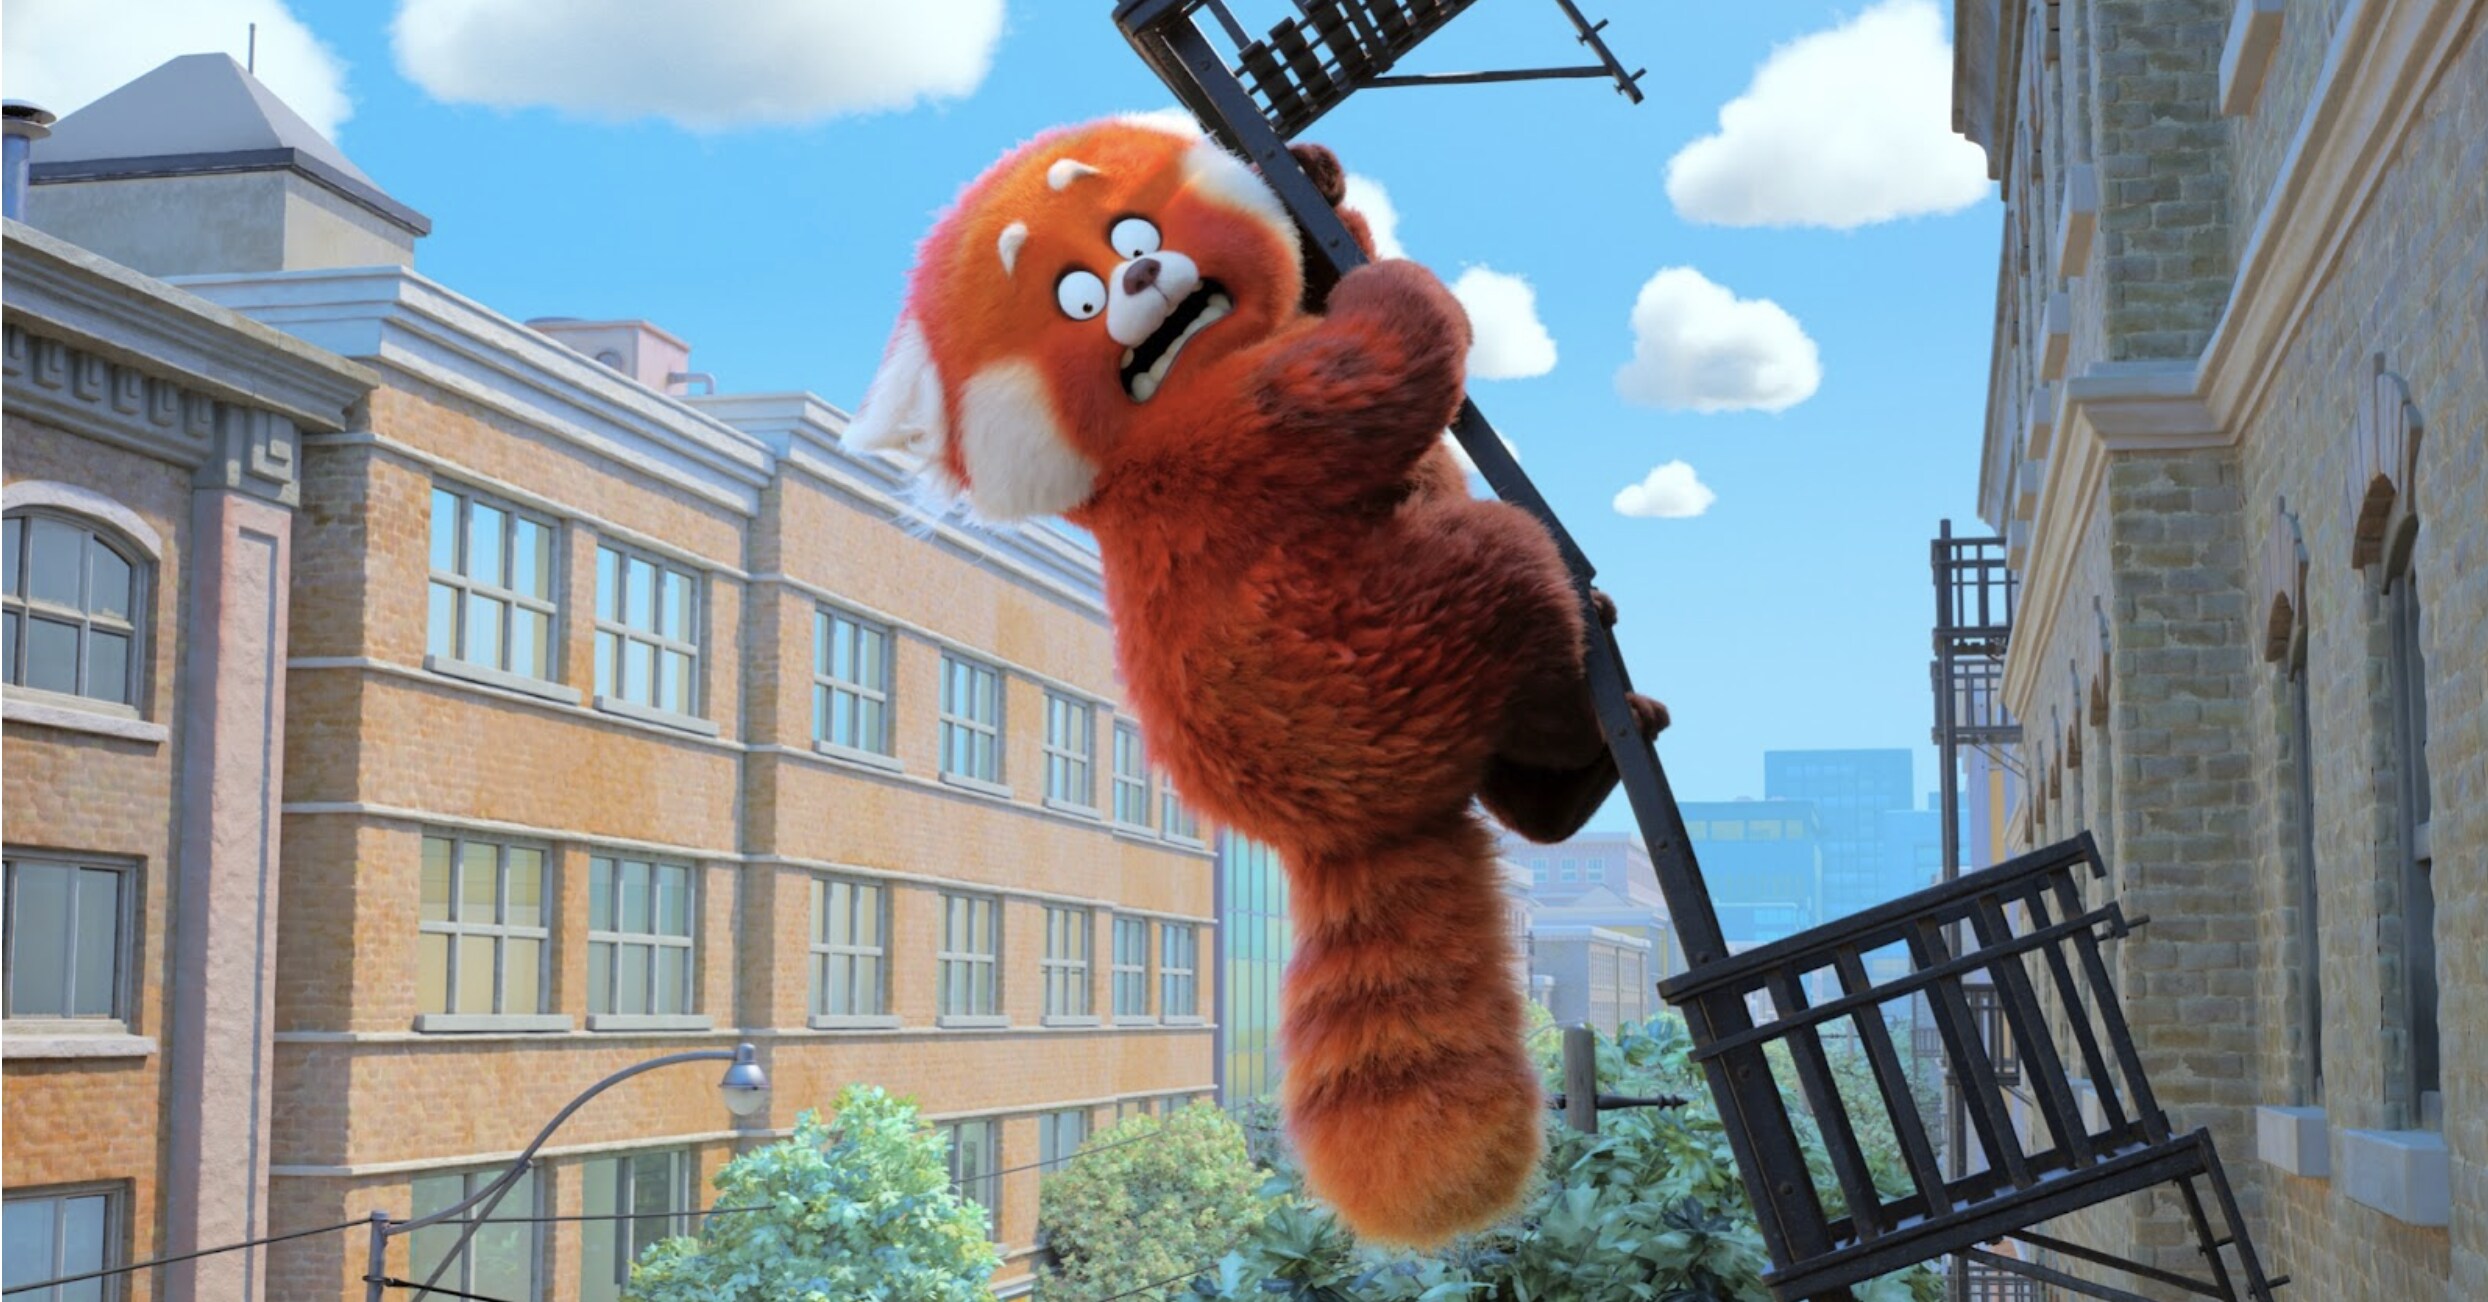 The Red Panda panics as the fire escape is bending from its weight in Disney and Pixar's Turning Red